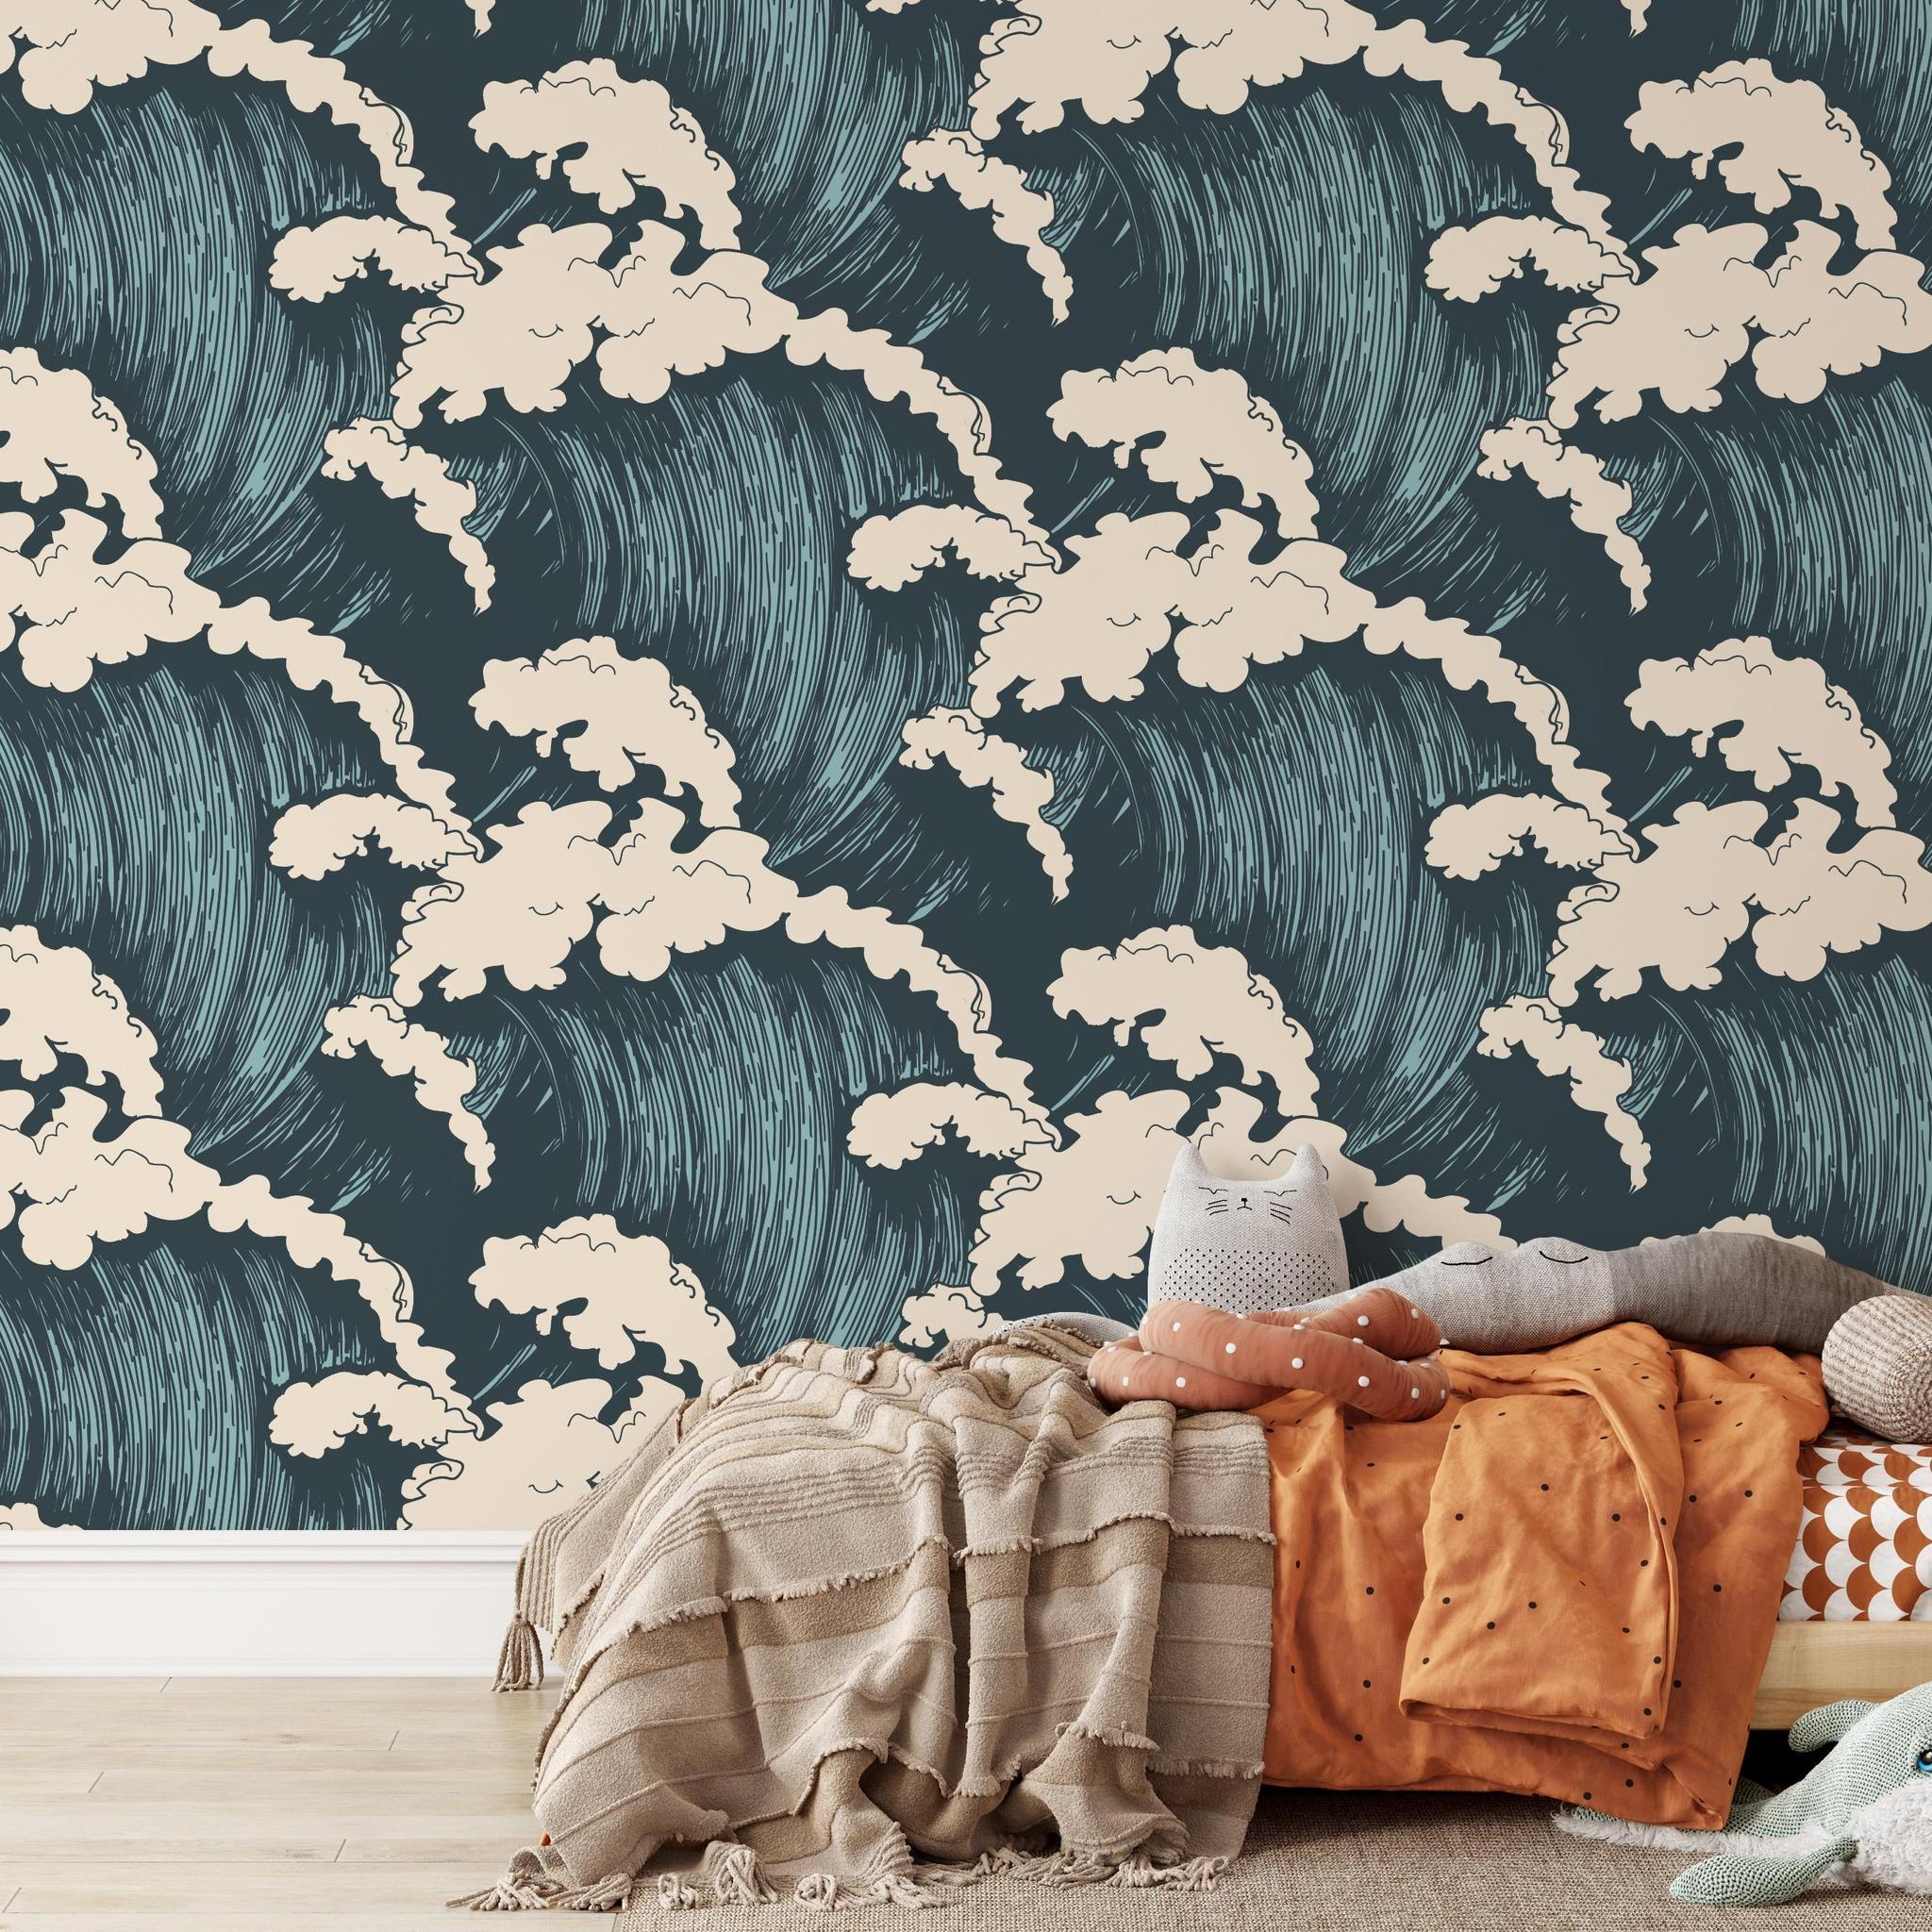 Maverick Wallpaper by Wall Blush SG02 in a cozy children's room with a playful and stylish design.
